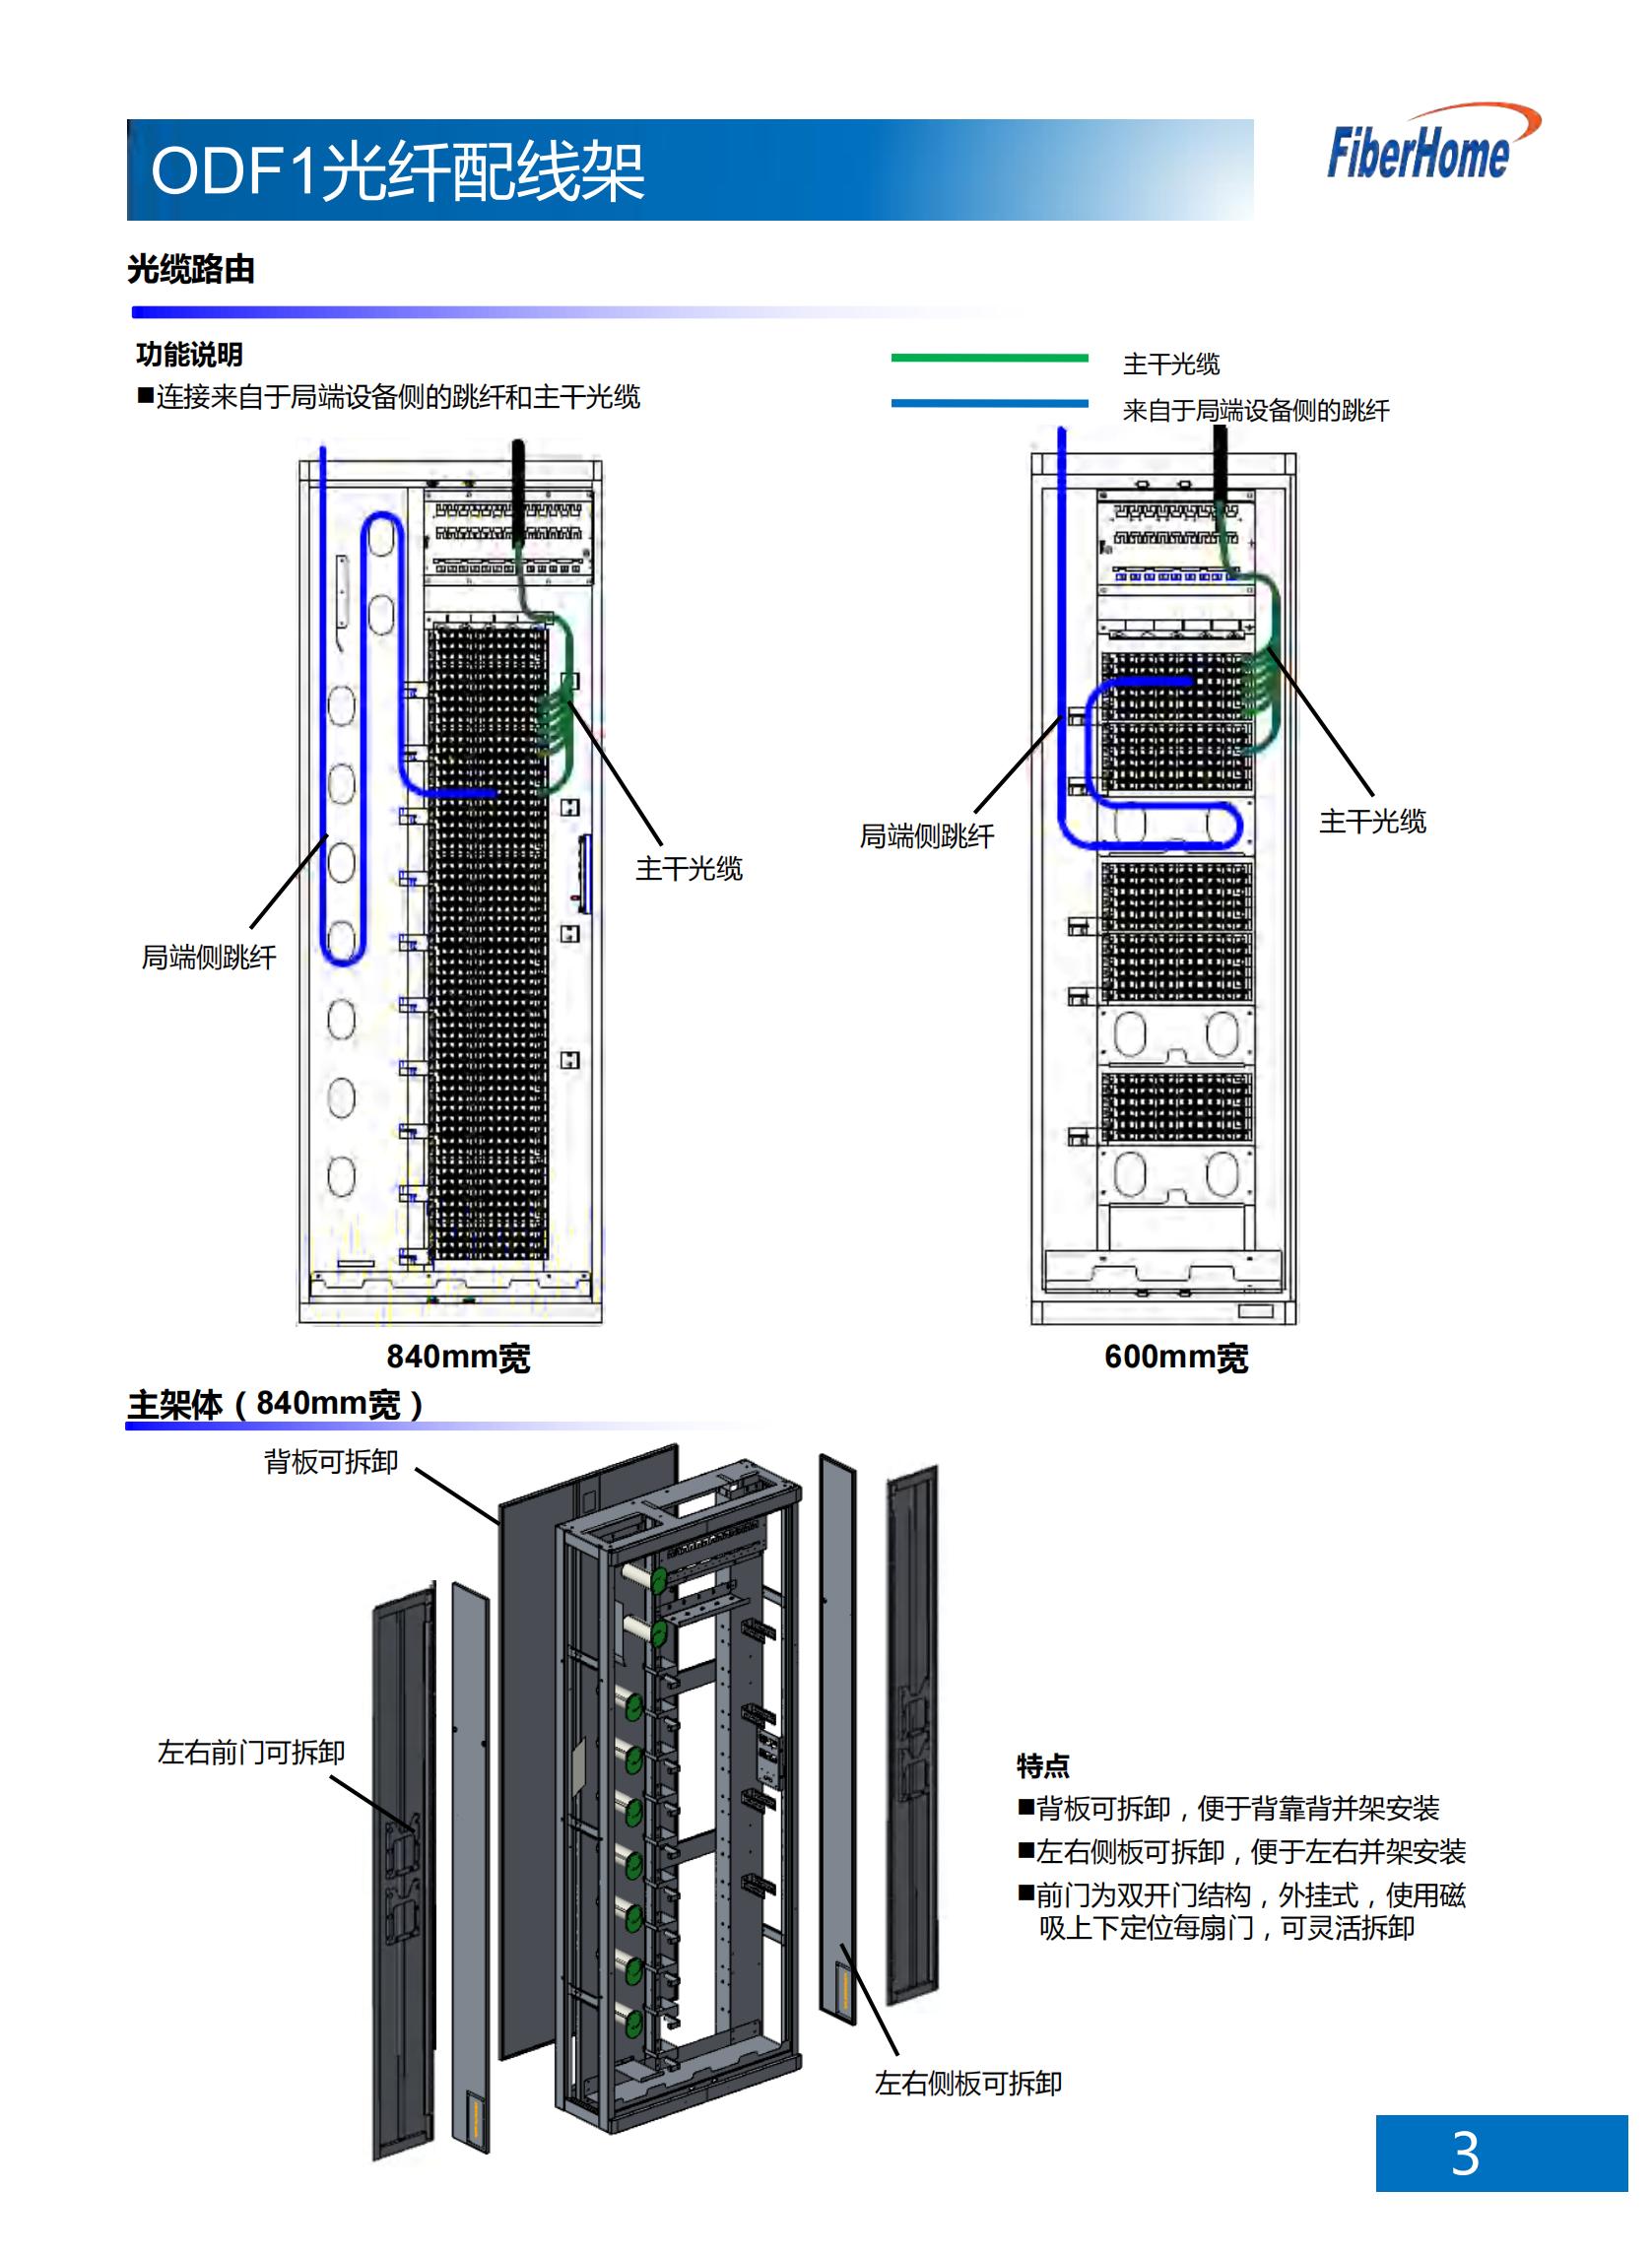 ODF101-1440-A2-LC ODF optical fiber distribution frame (720-core floor-standing all include 24-core LC fusion integration unit)